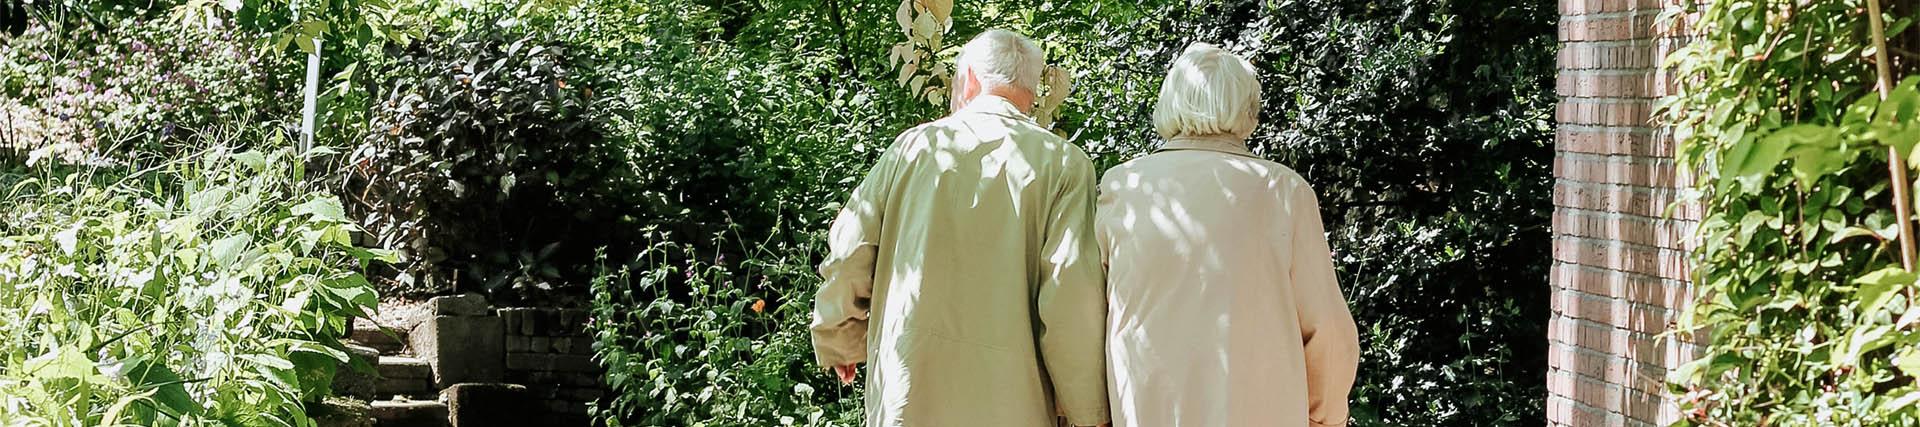 Two older people walking in the garden of their care home